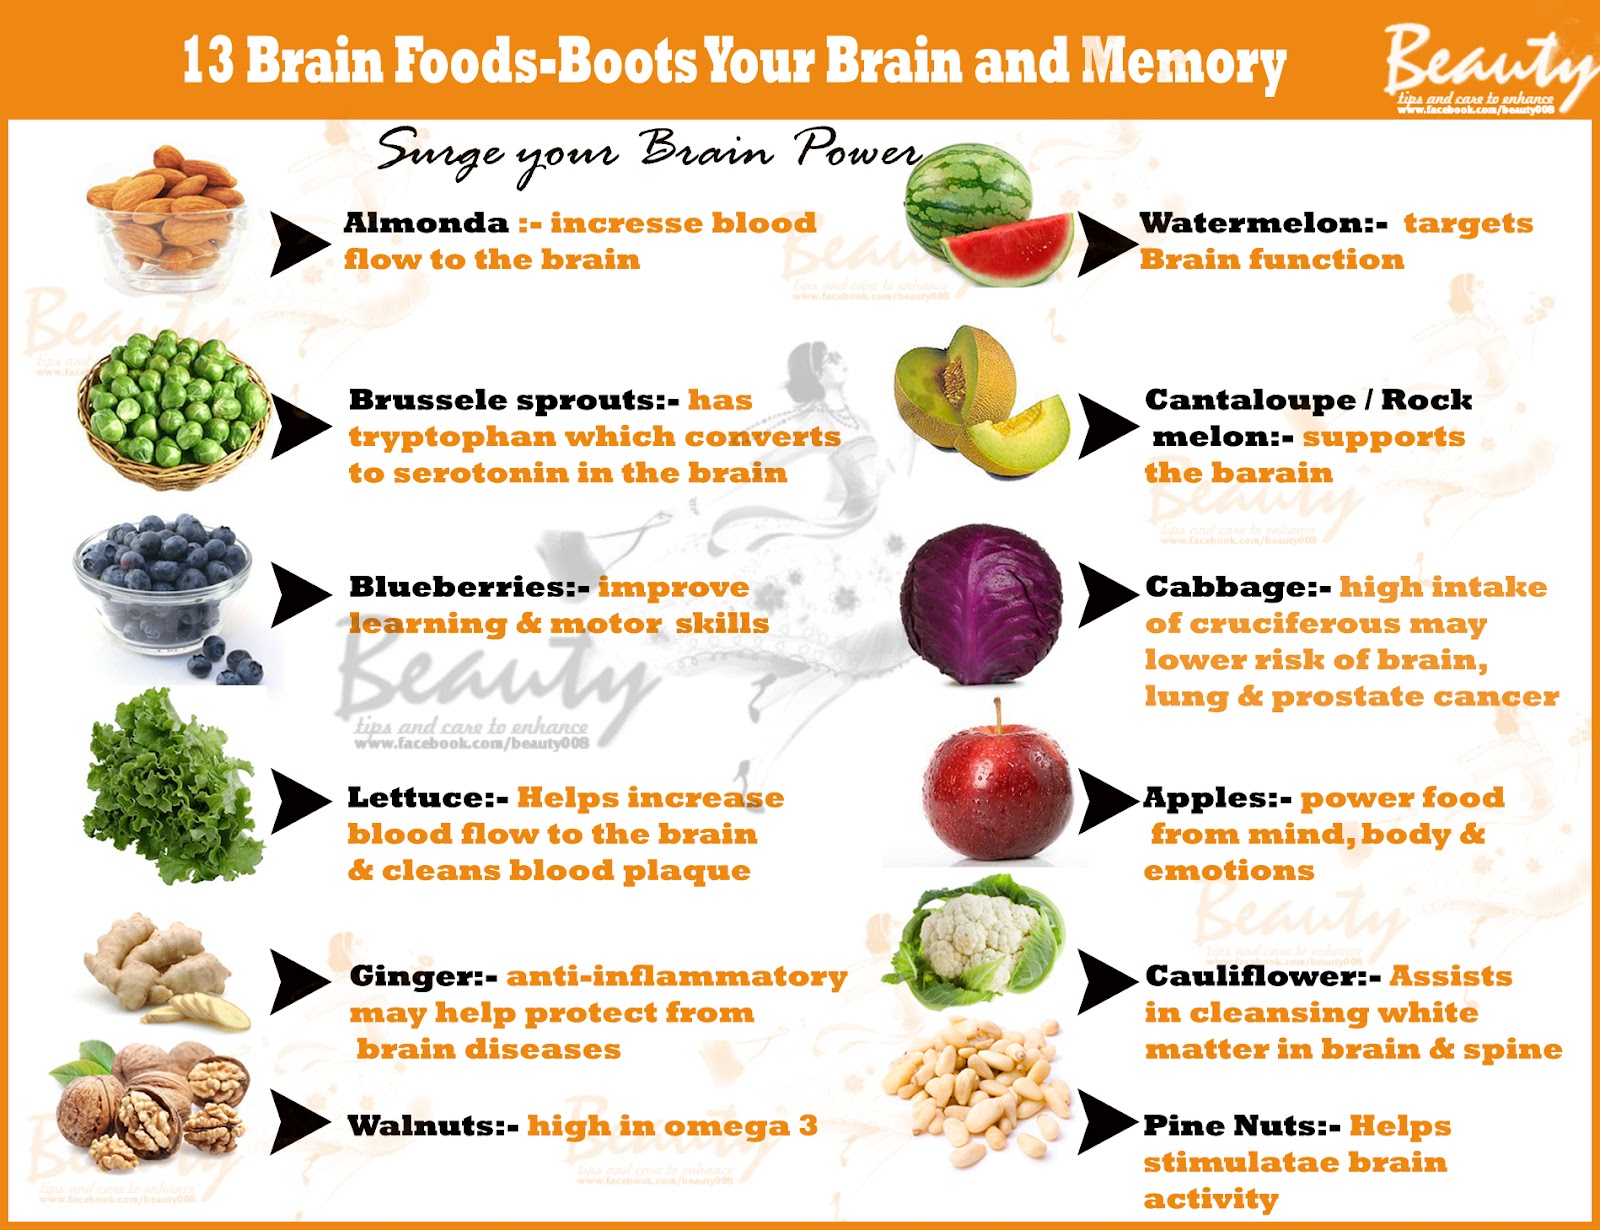 Beauty Tips (Health/Beauty).: 13 Brain Foods - Boost Your Brain and Memory